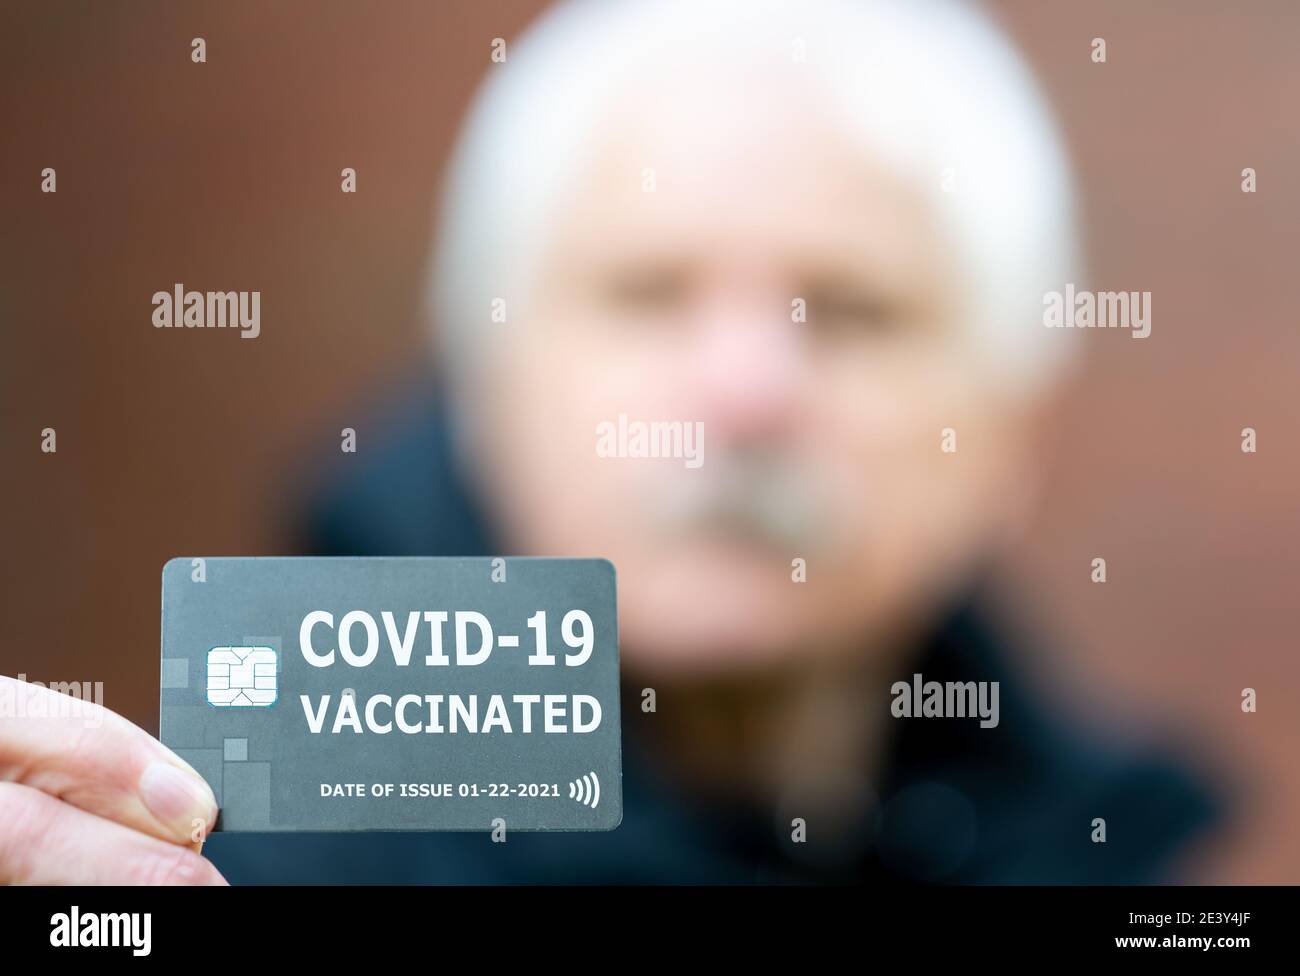 Senior man showing an vaccination certificate, which indicates a vaccination against covid-19. Stock Photo